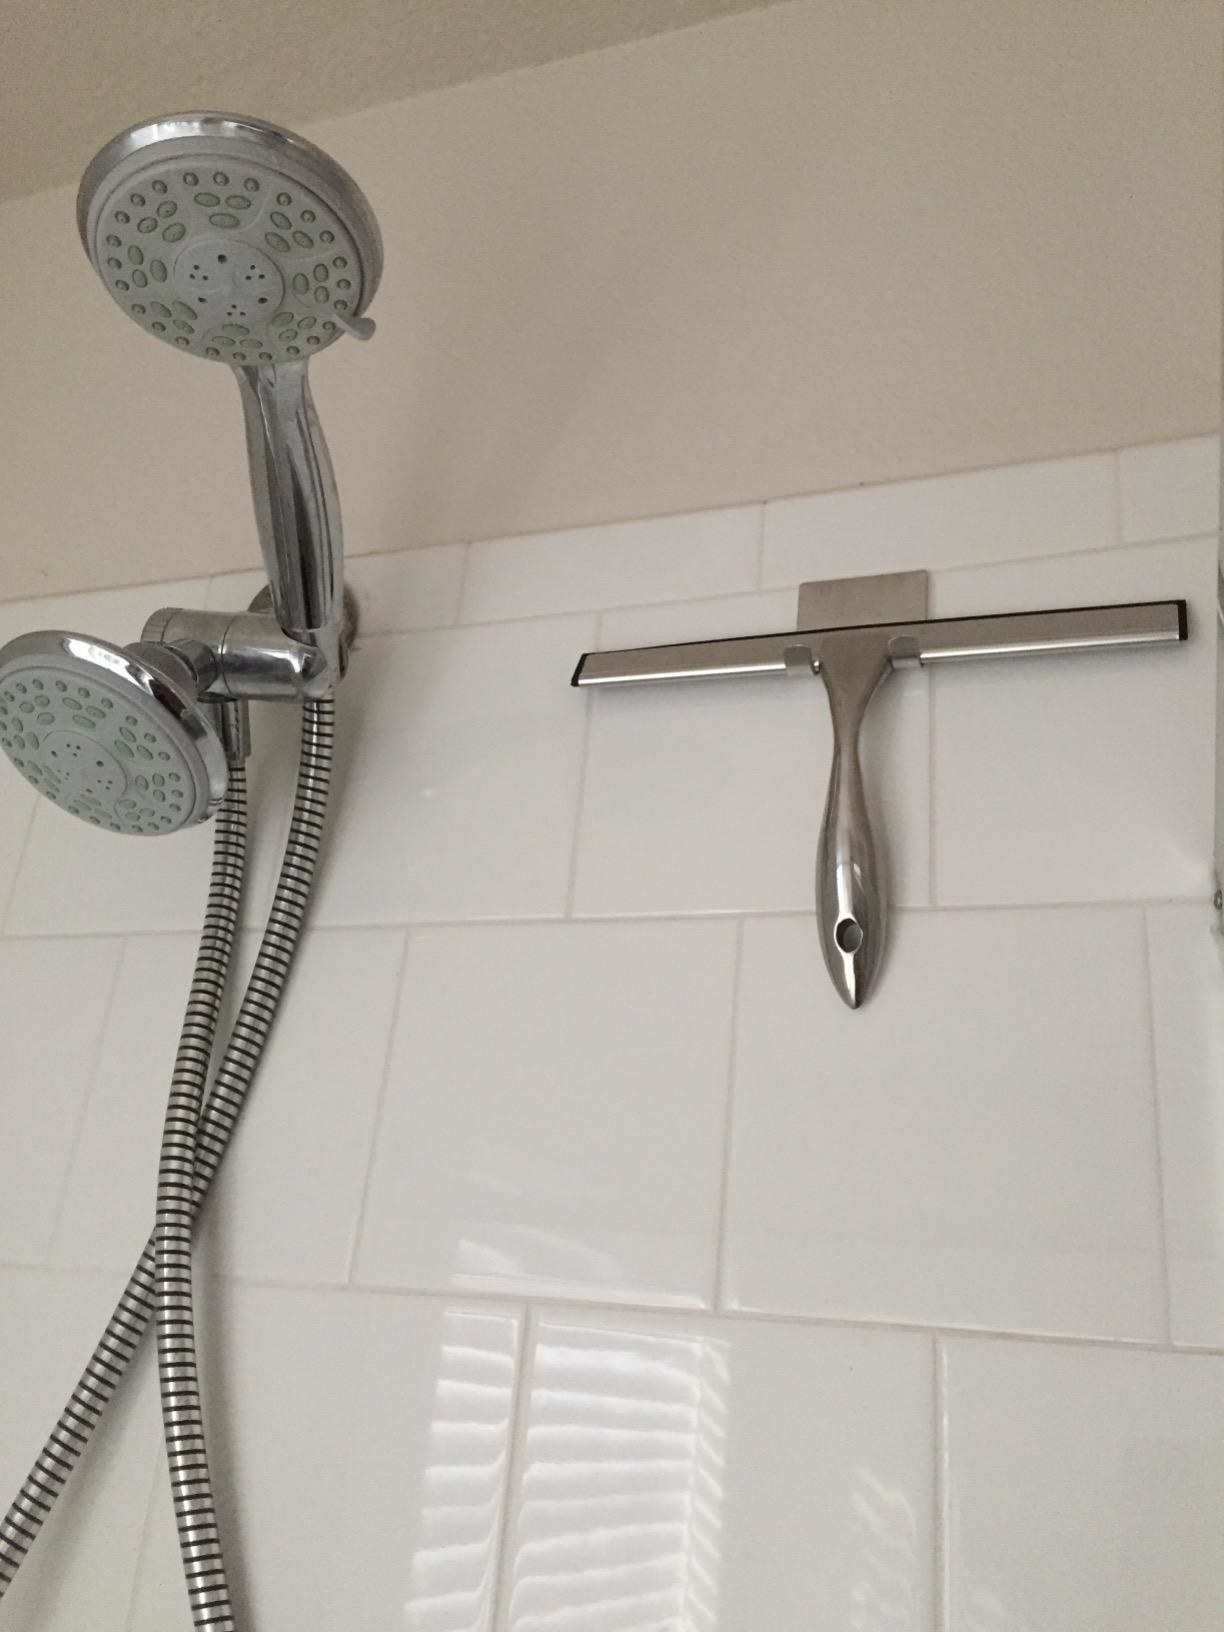 A reviewer photo of the squeegee mounted on its hook in the shower